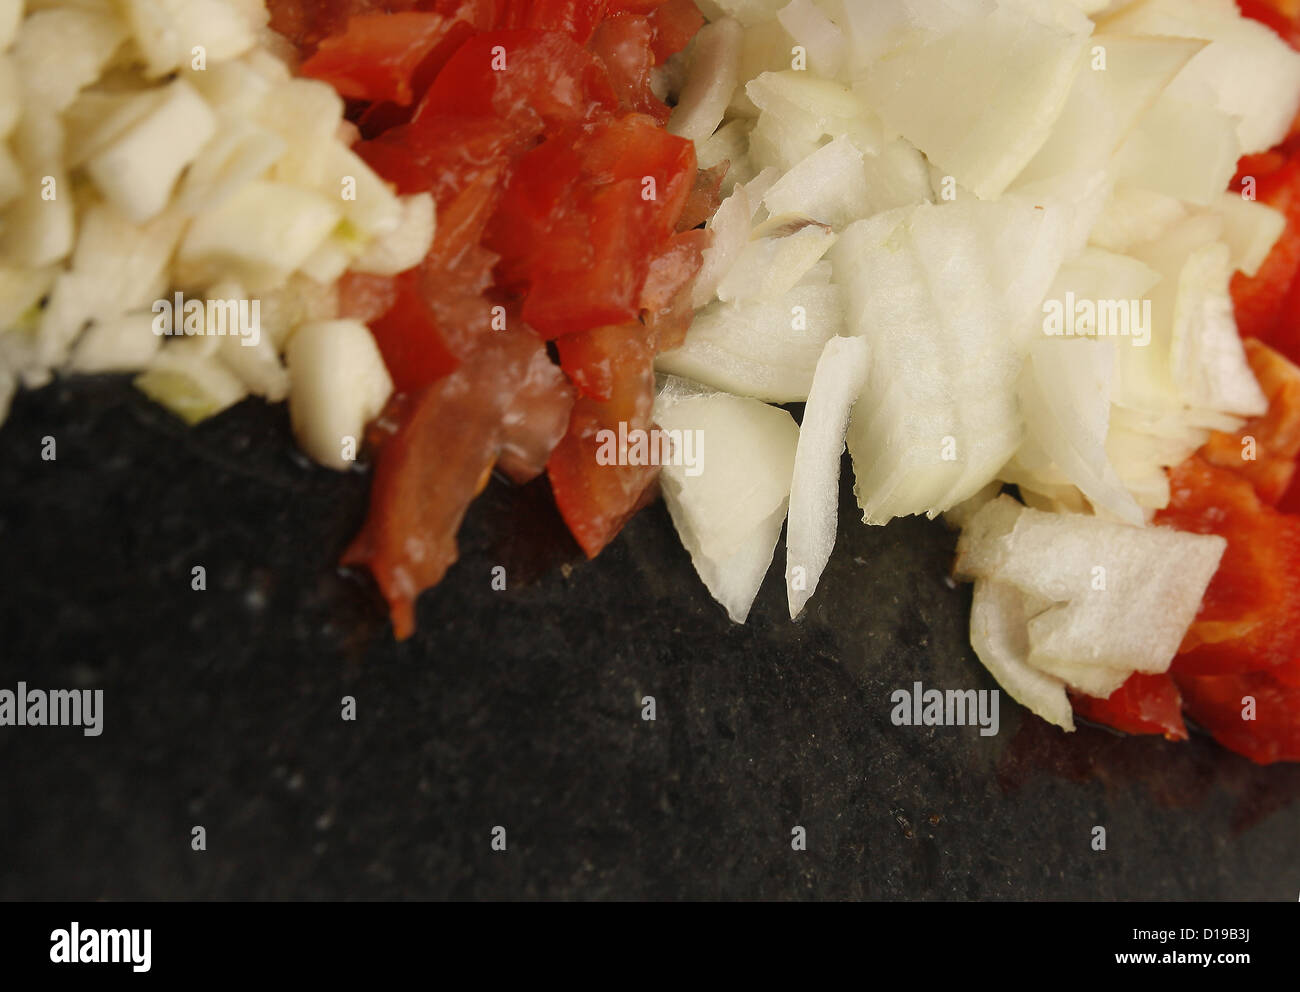 food pyramid of peppers, onions, tomatoes and garlic on marble chopping board Stock Photo